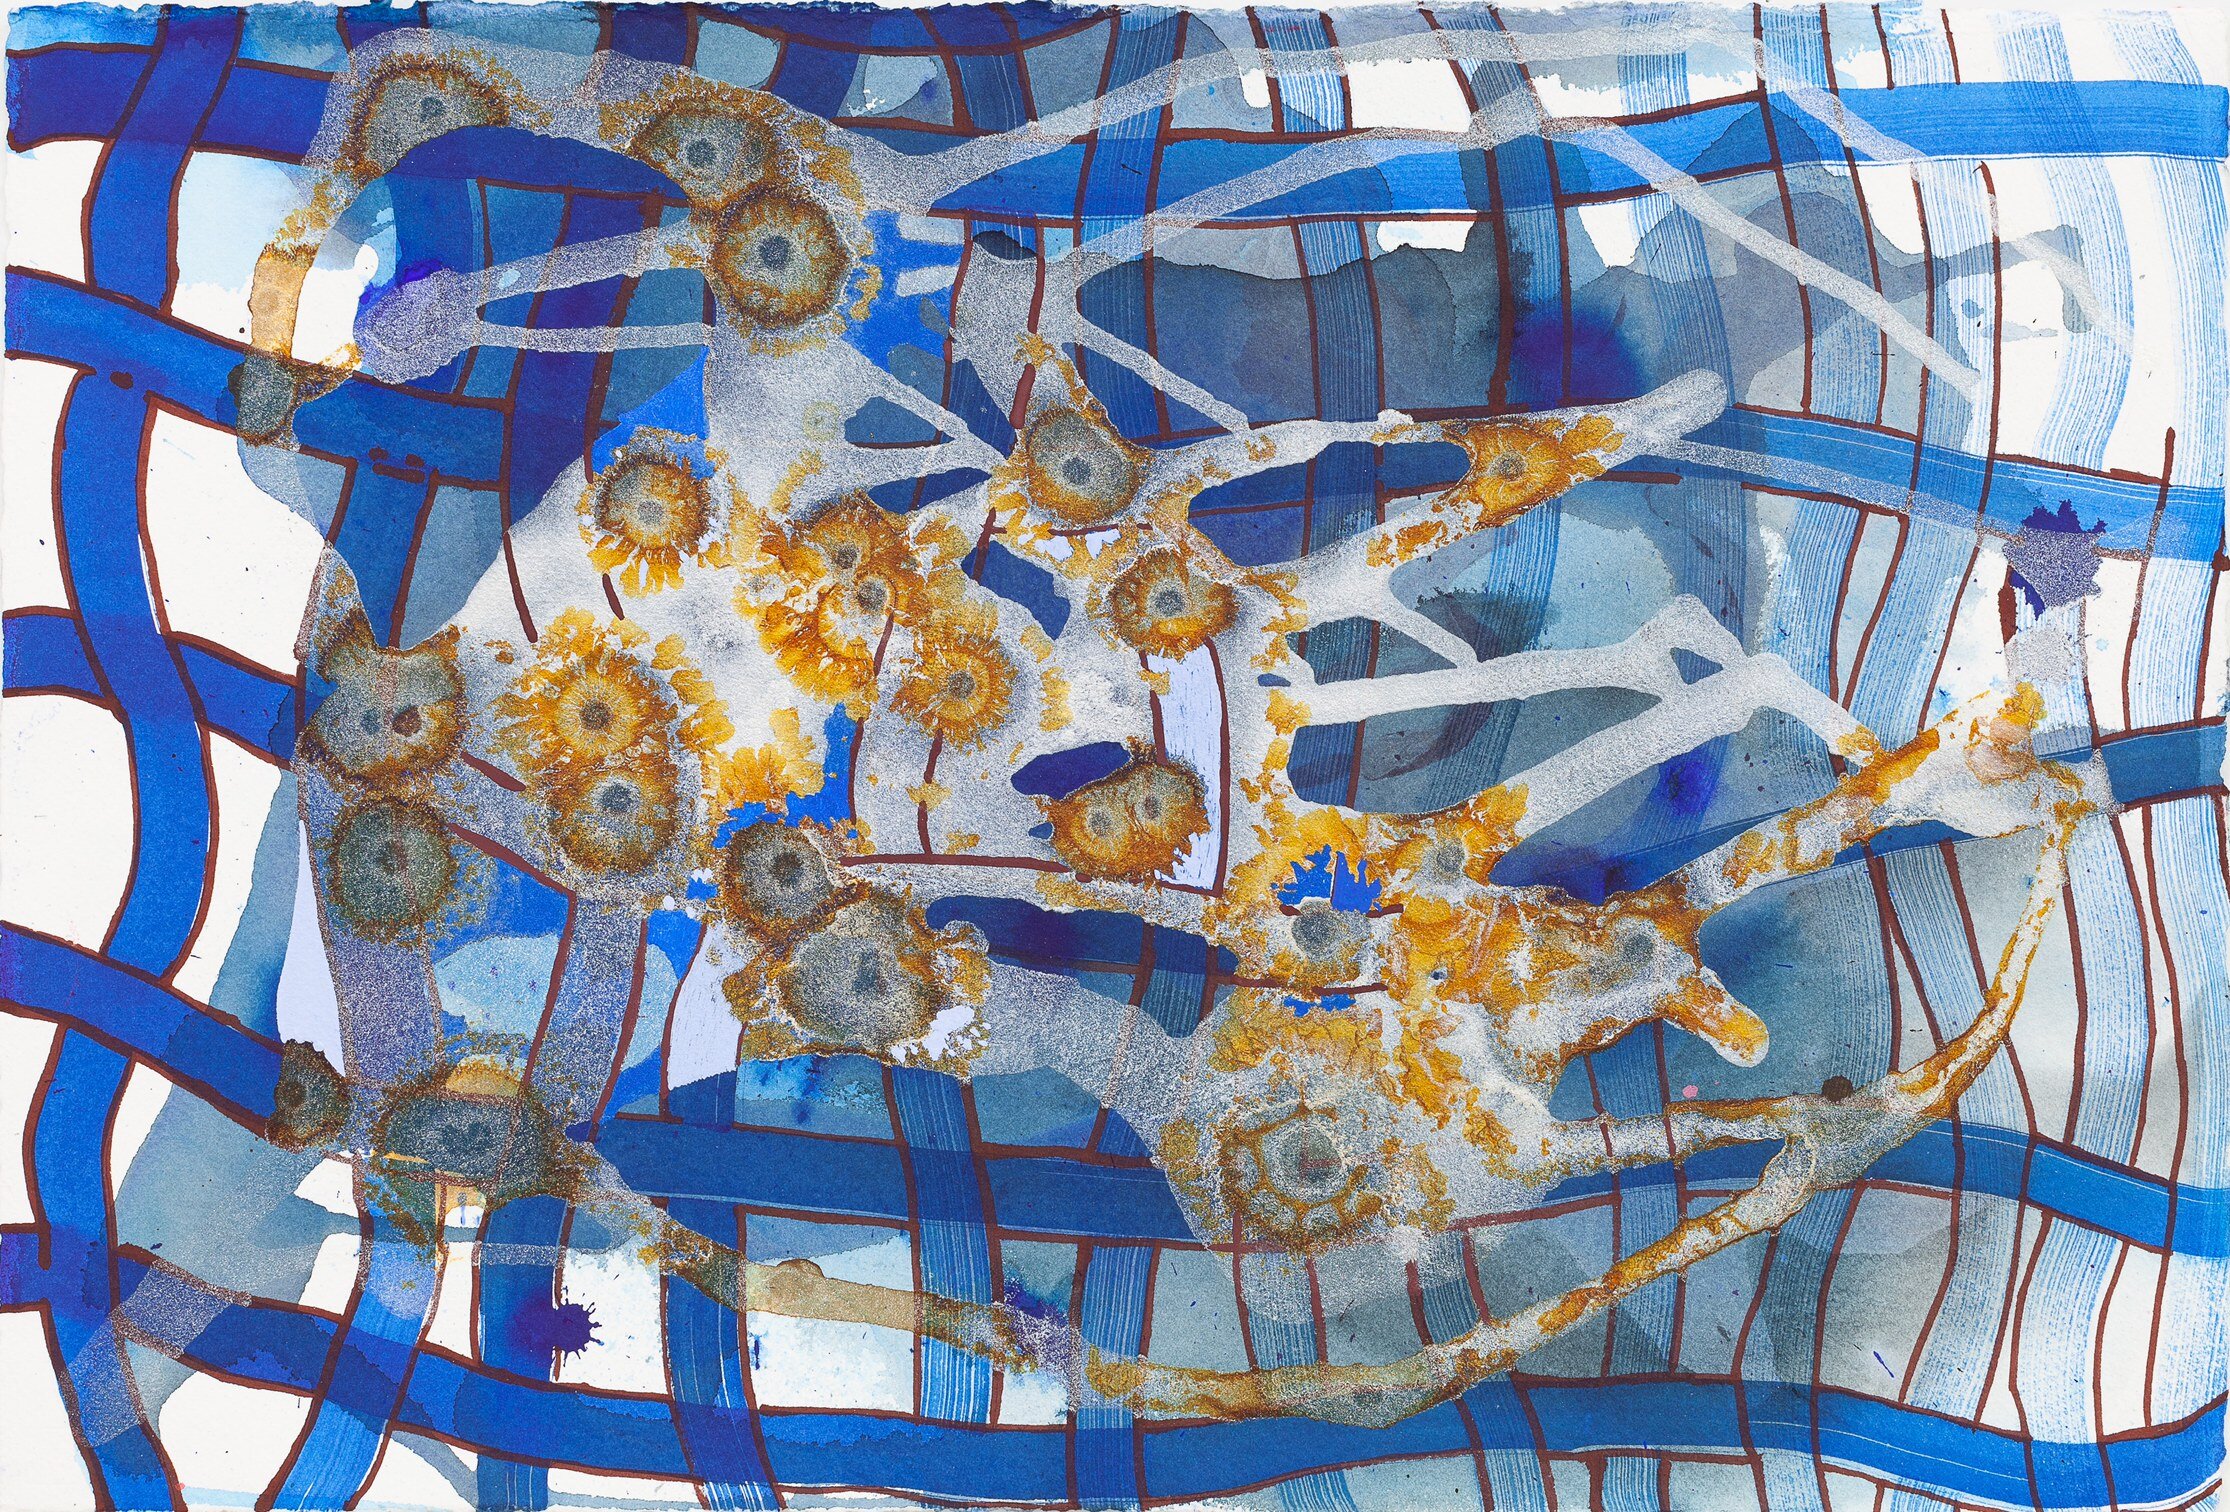  Elisabeth Condon  Blue Lattice,  2020    Ink and mediums on 300 lb. watercolor paper  15 x 22 1/4 inches  